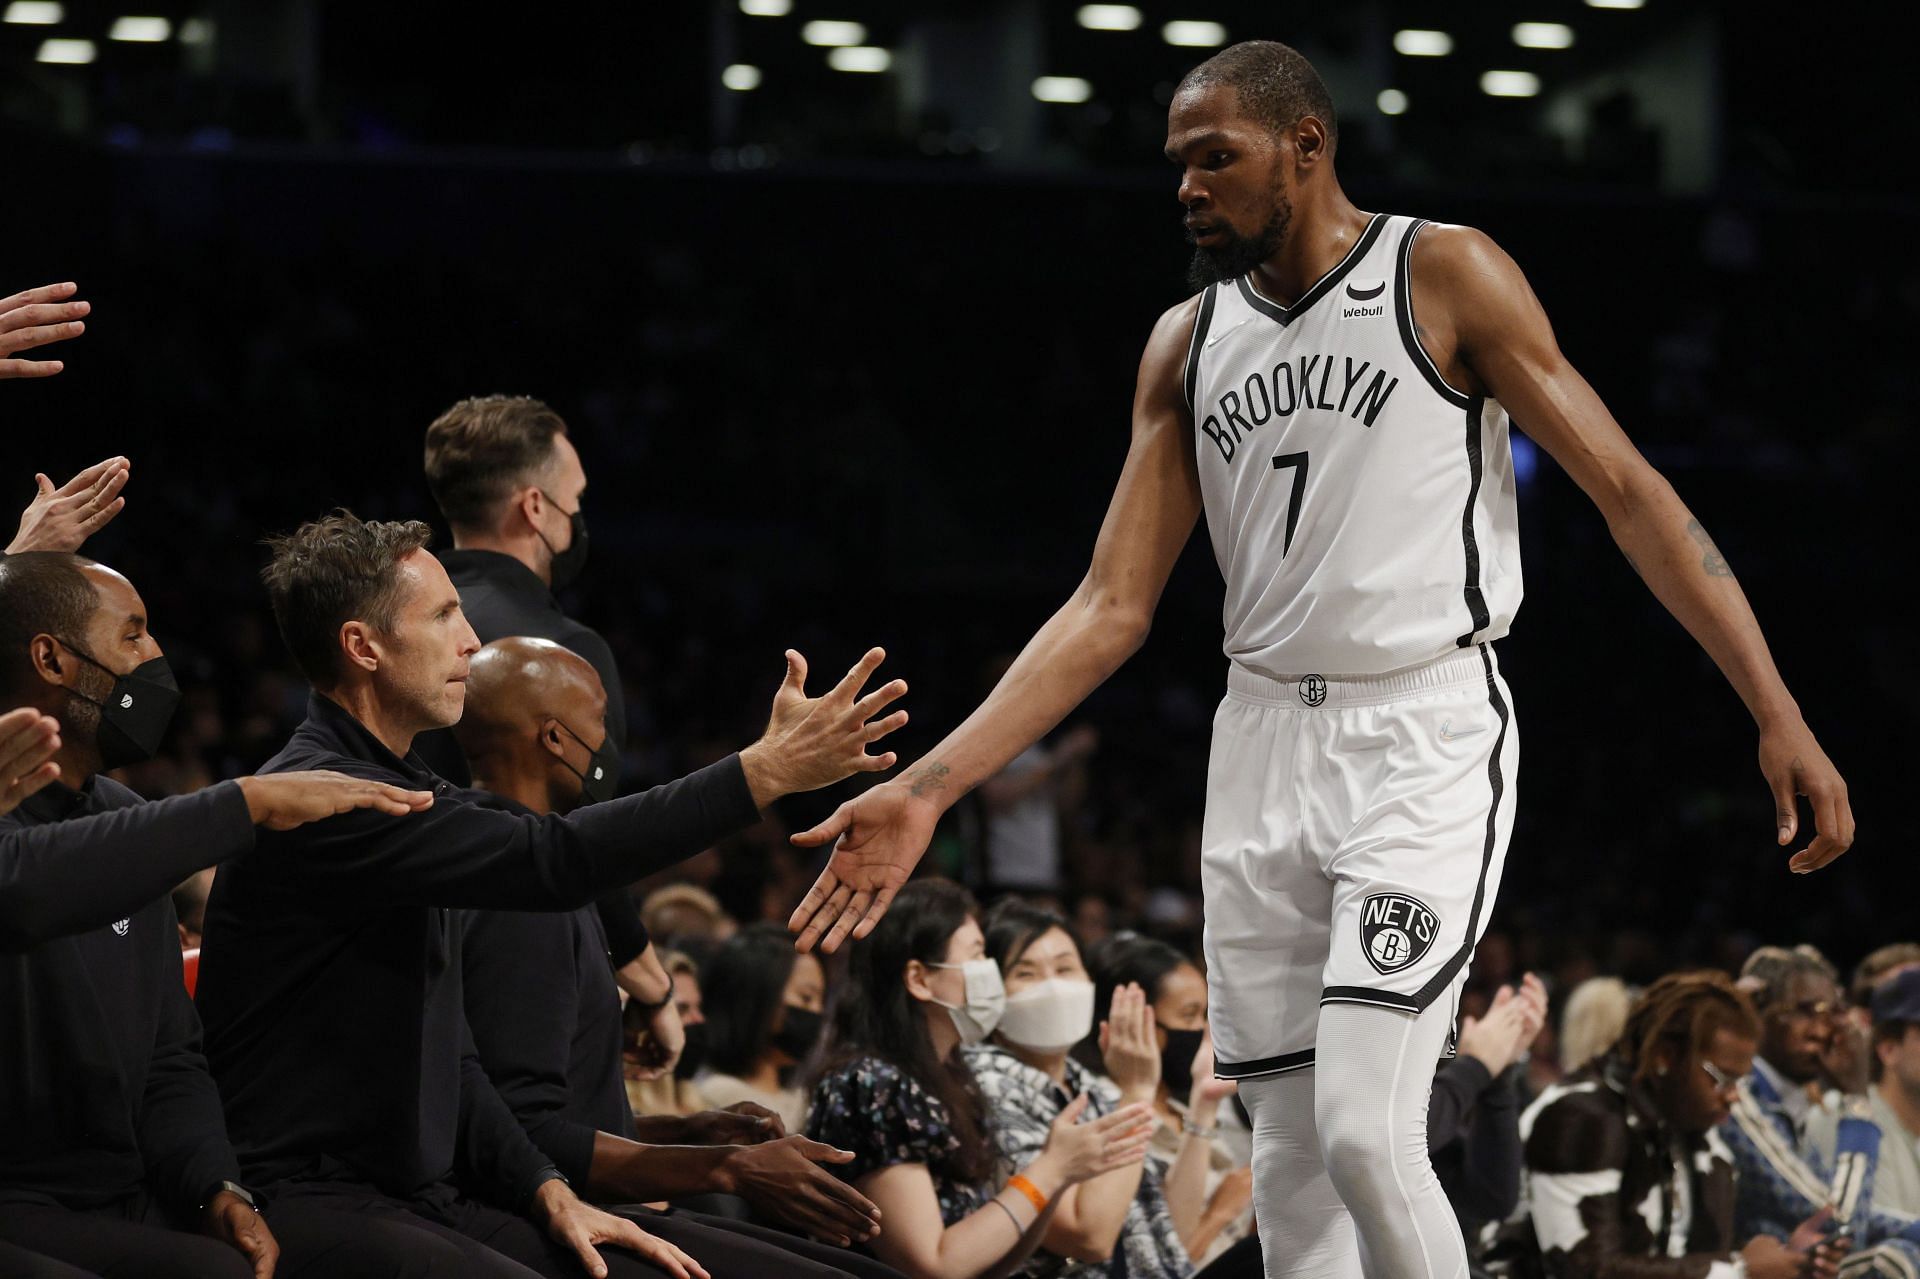 Kevin Durant heads to the bench to rest during a Brooklyn Nets game.